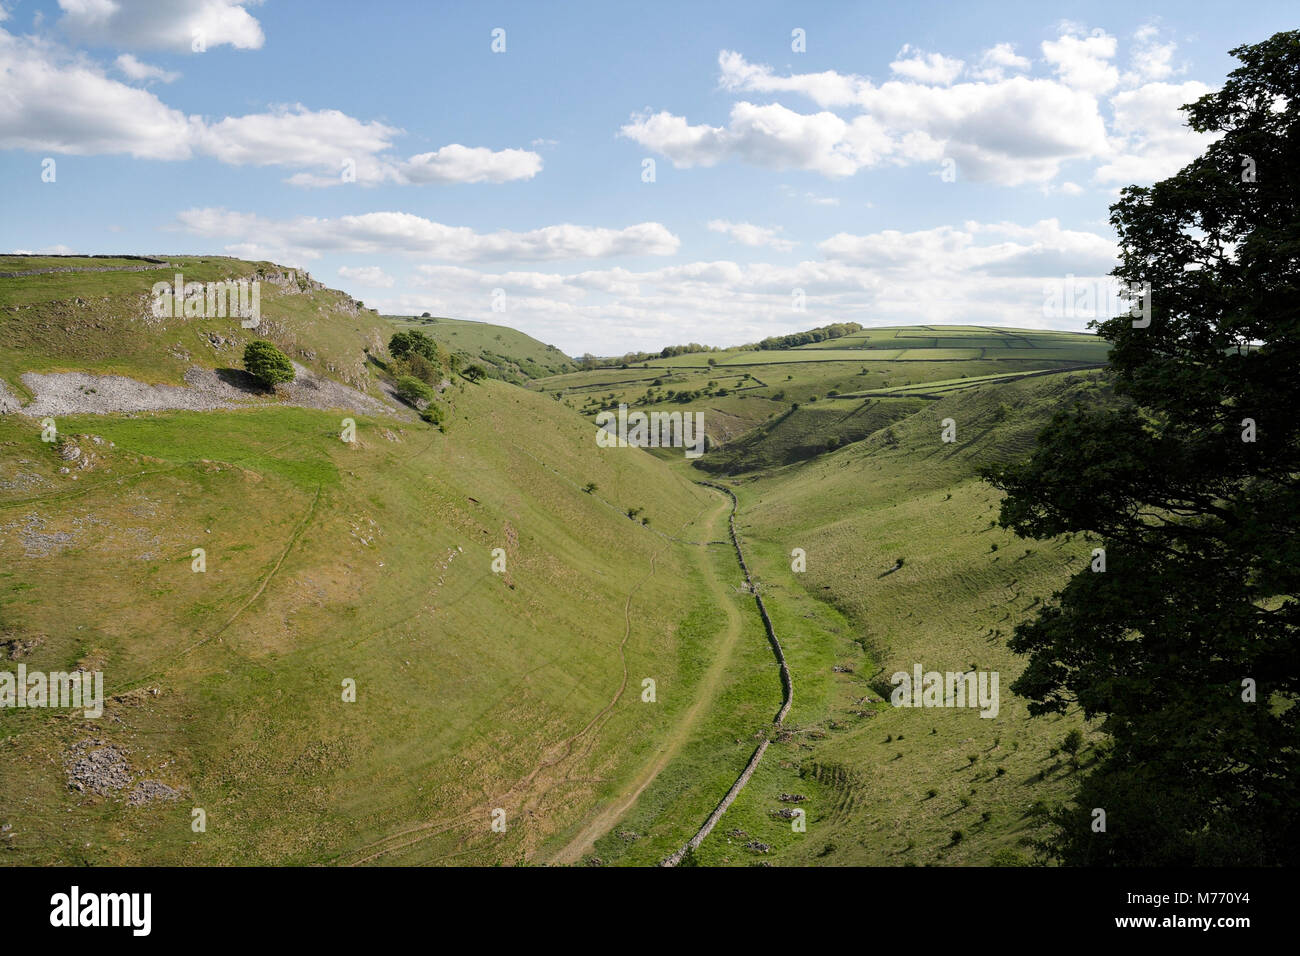 Cressbrook Dale in the Peak District national park countryside in Derbyshire, England UK, dry limestone valley landscape Stock Photo